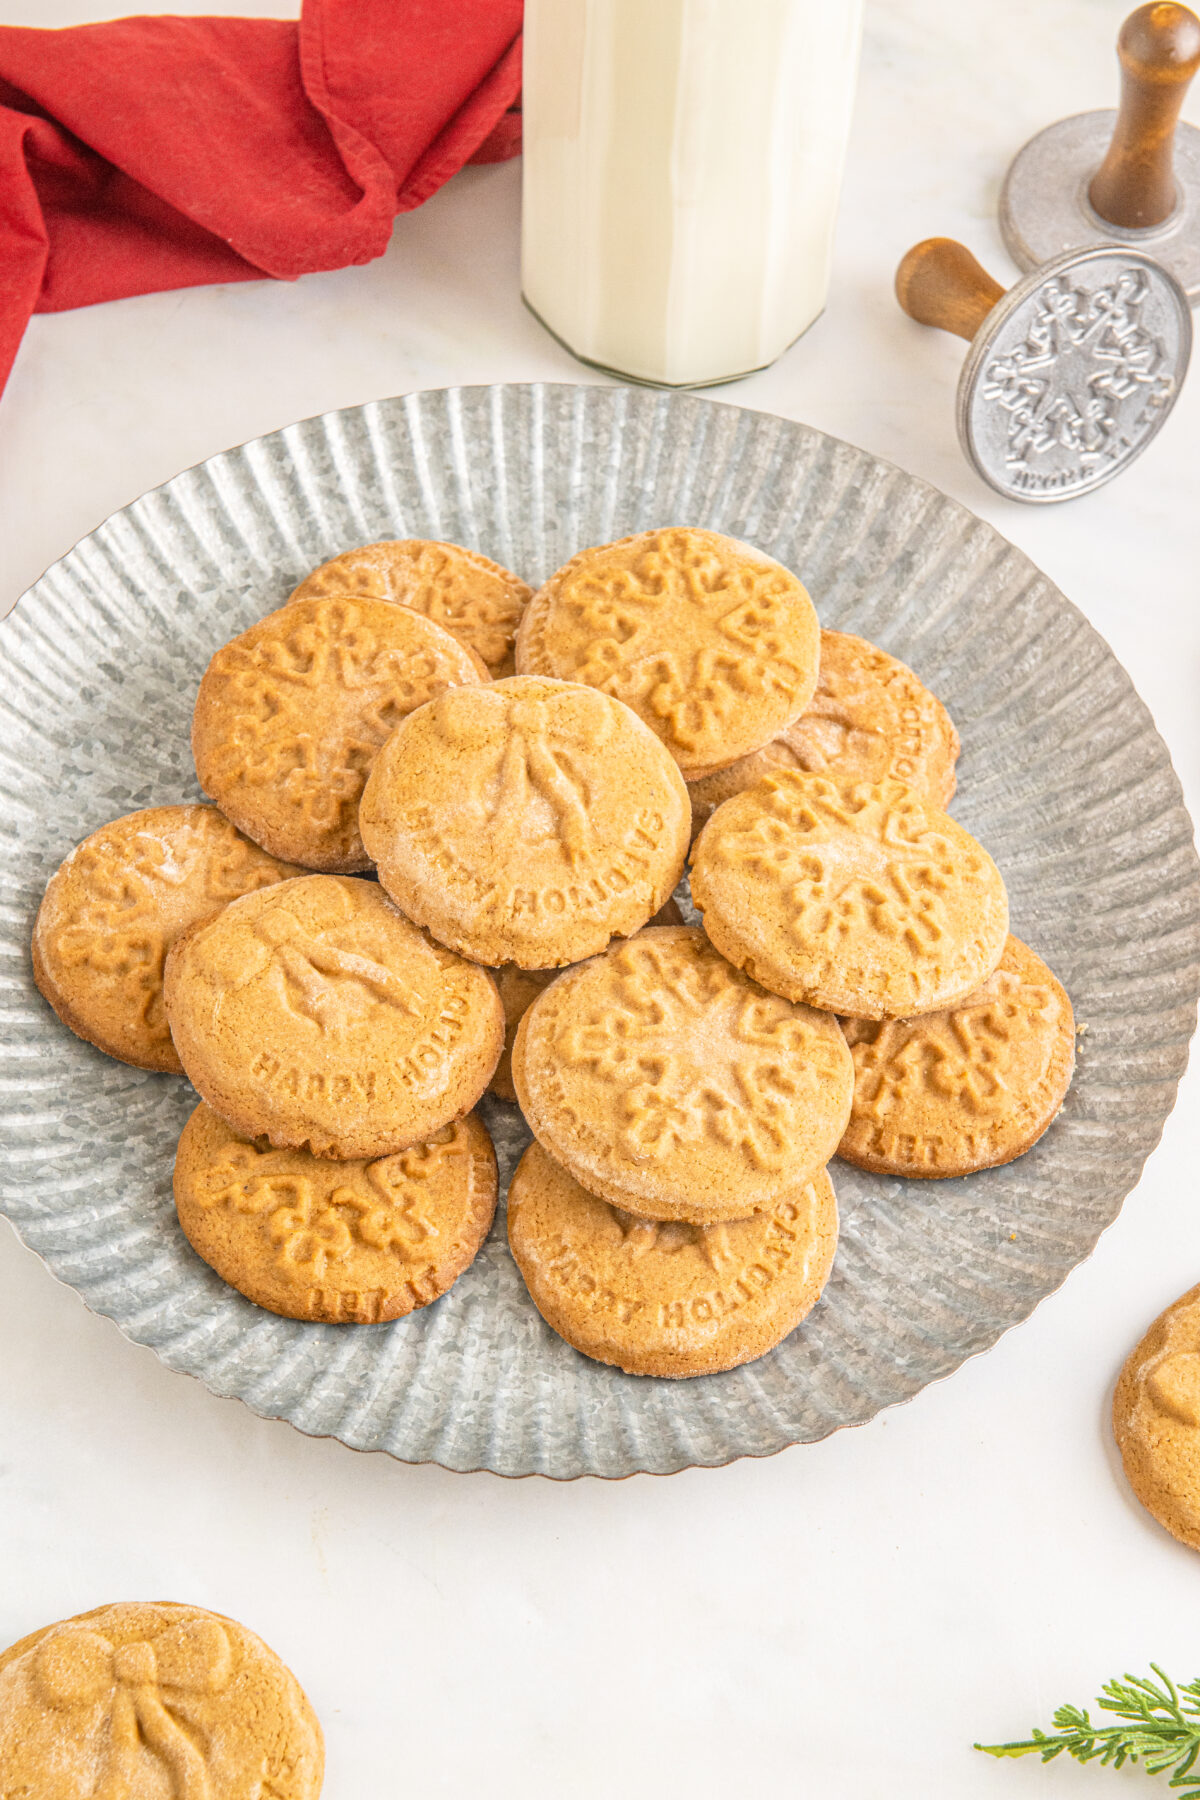 Get your holiday baking underway with these delicious stamped cookies! These gorgeous cookies are perfect for gifting or sharing!